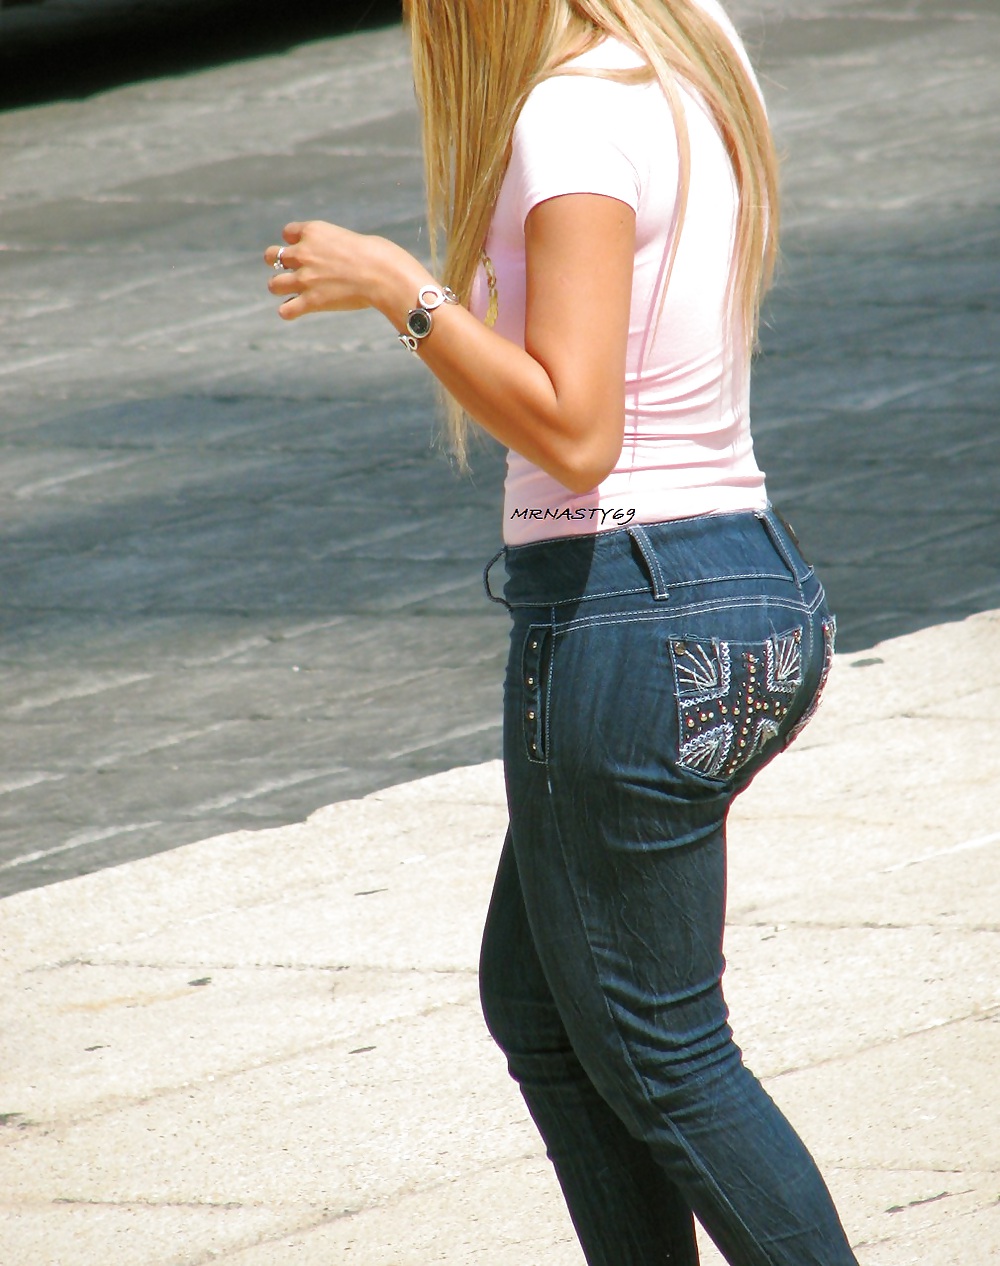 Wife In Tight Jeans #8 #14228448